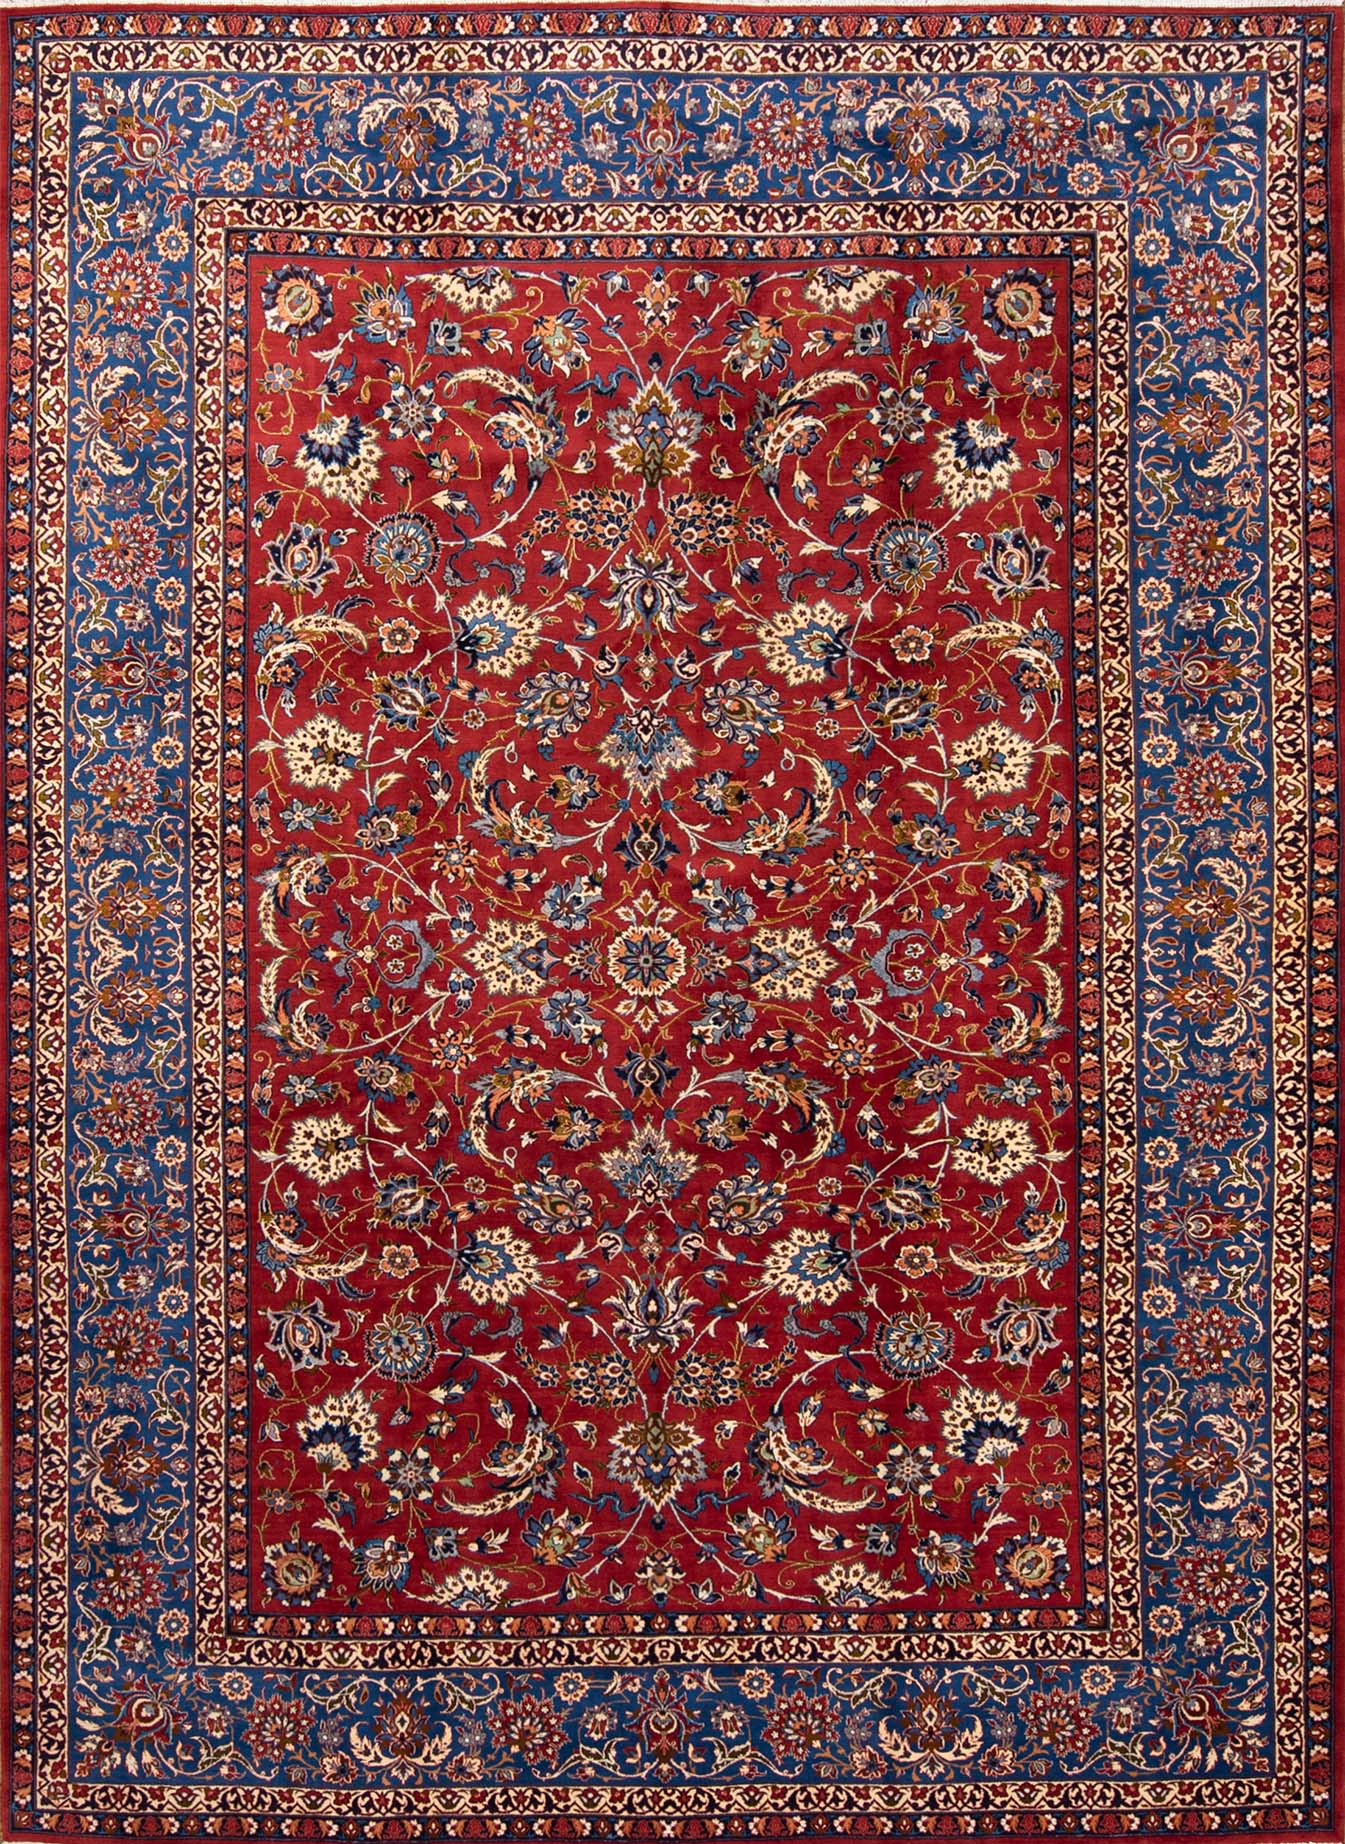 Large living room rugs, hand knotted red Persian rug. Size 10.9x14.6.